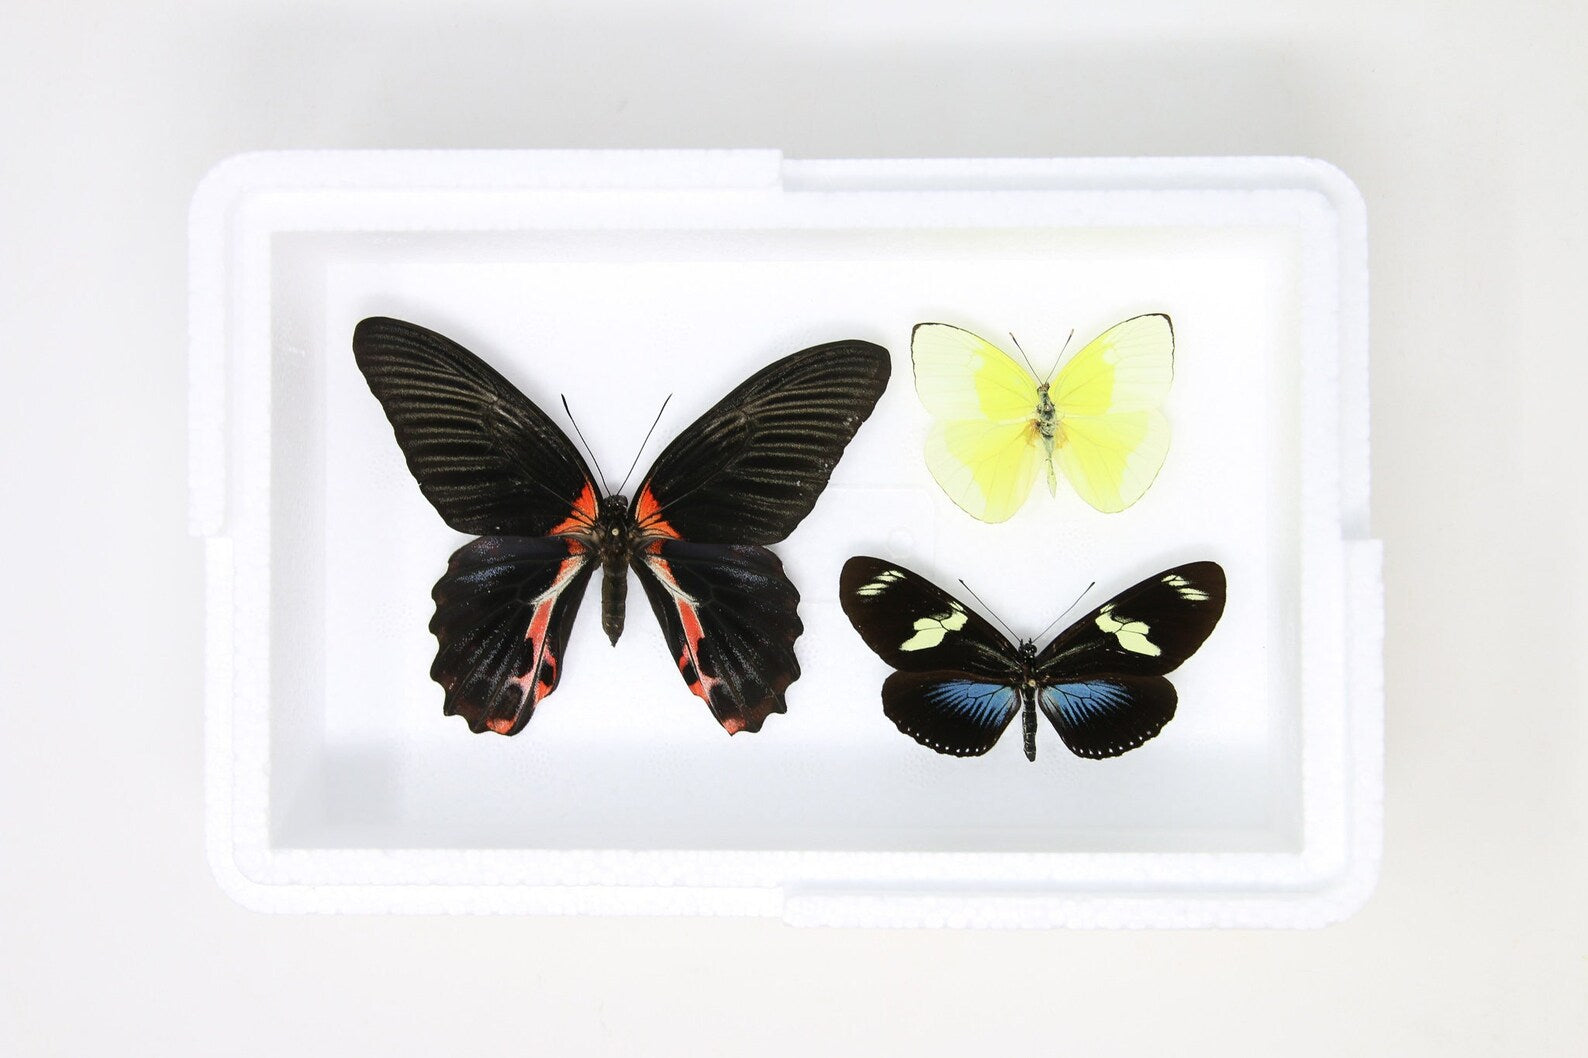 Pinned Tropical Butterflies, A1 Real Butterfly Pinned Set Specimens, Entomology Taxidermy (#BUT77)